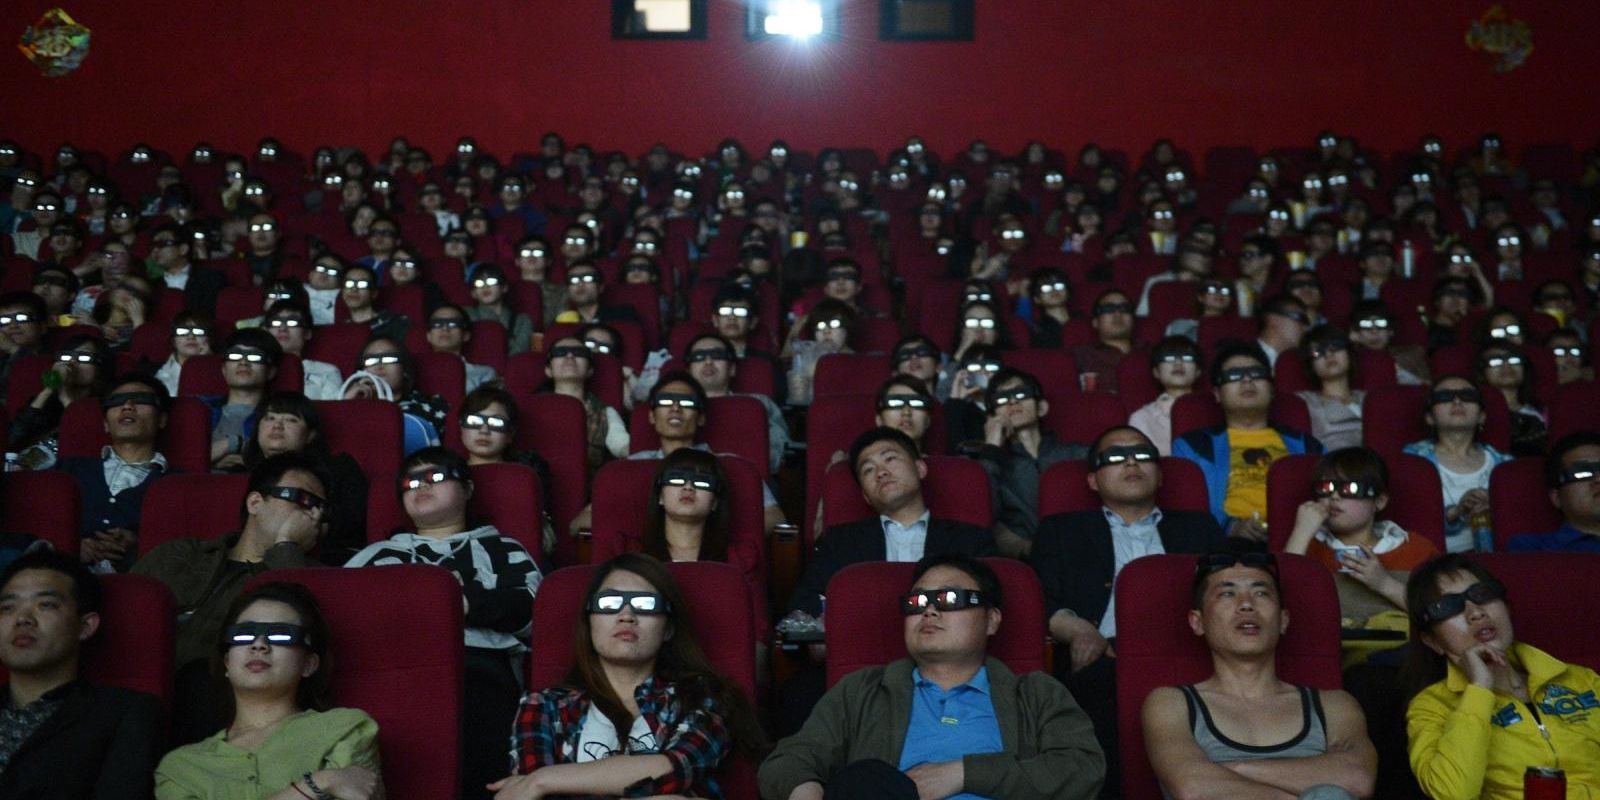 People watch the screen in a movie theatre